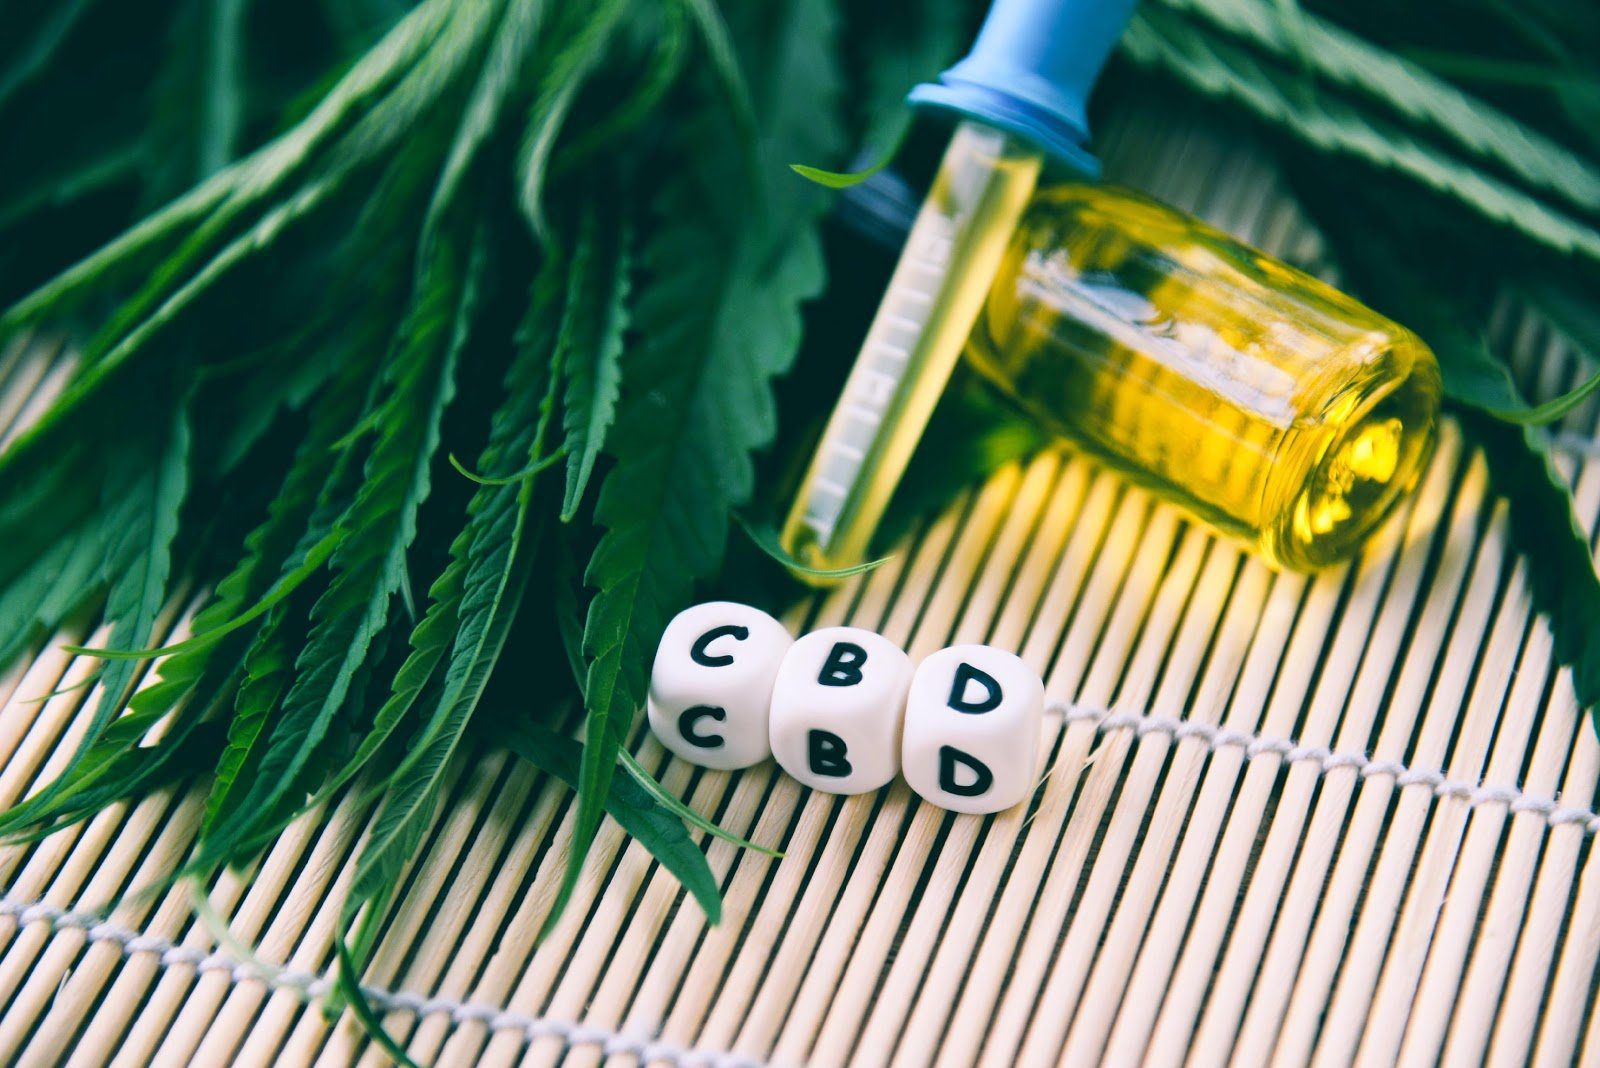 Is It Legal To Order CBD Flowers Online?